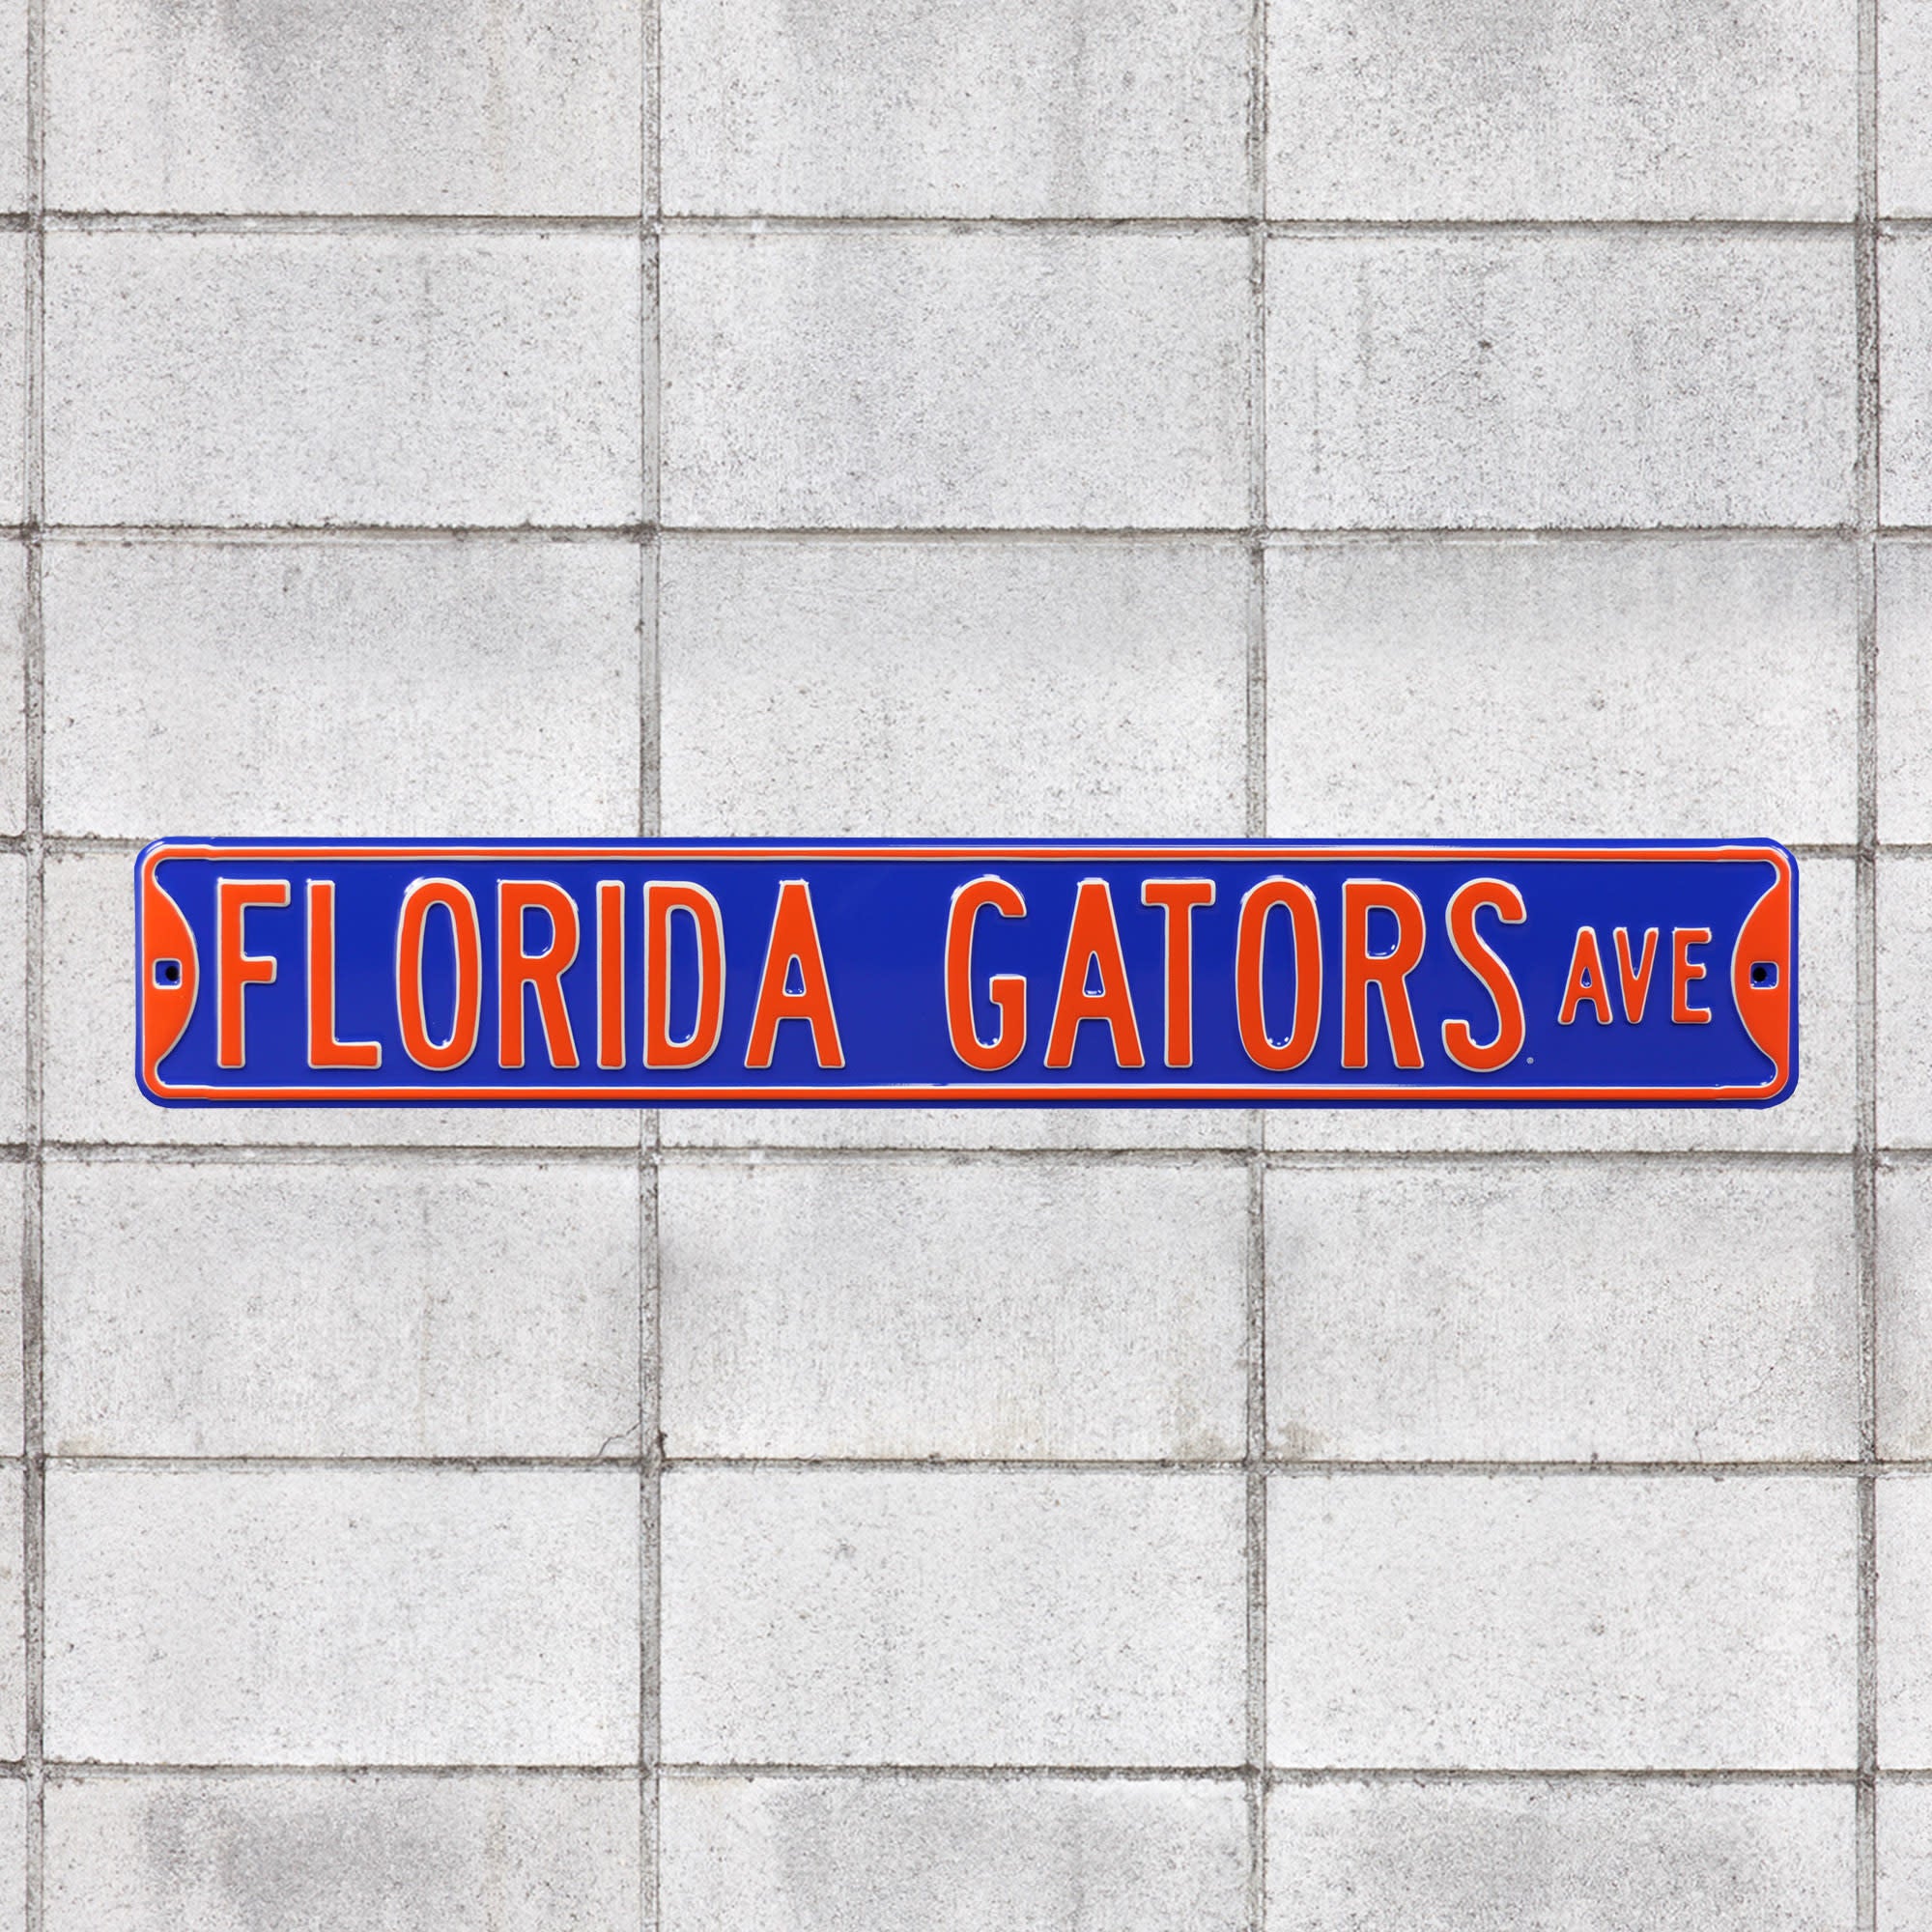 Florida Gators: Florida Gators Avenue - Officially Licensed Metal Street Sign 36.0"W x 6.0"H by Fathead | 100% Steel